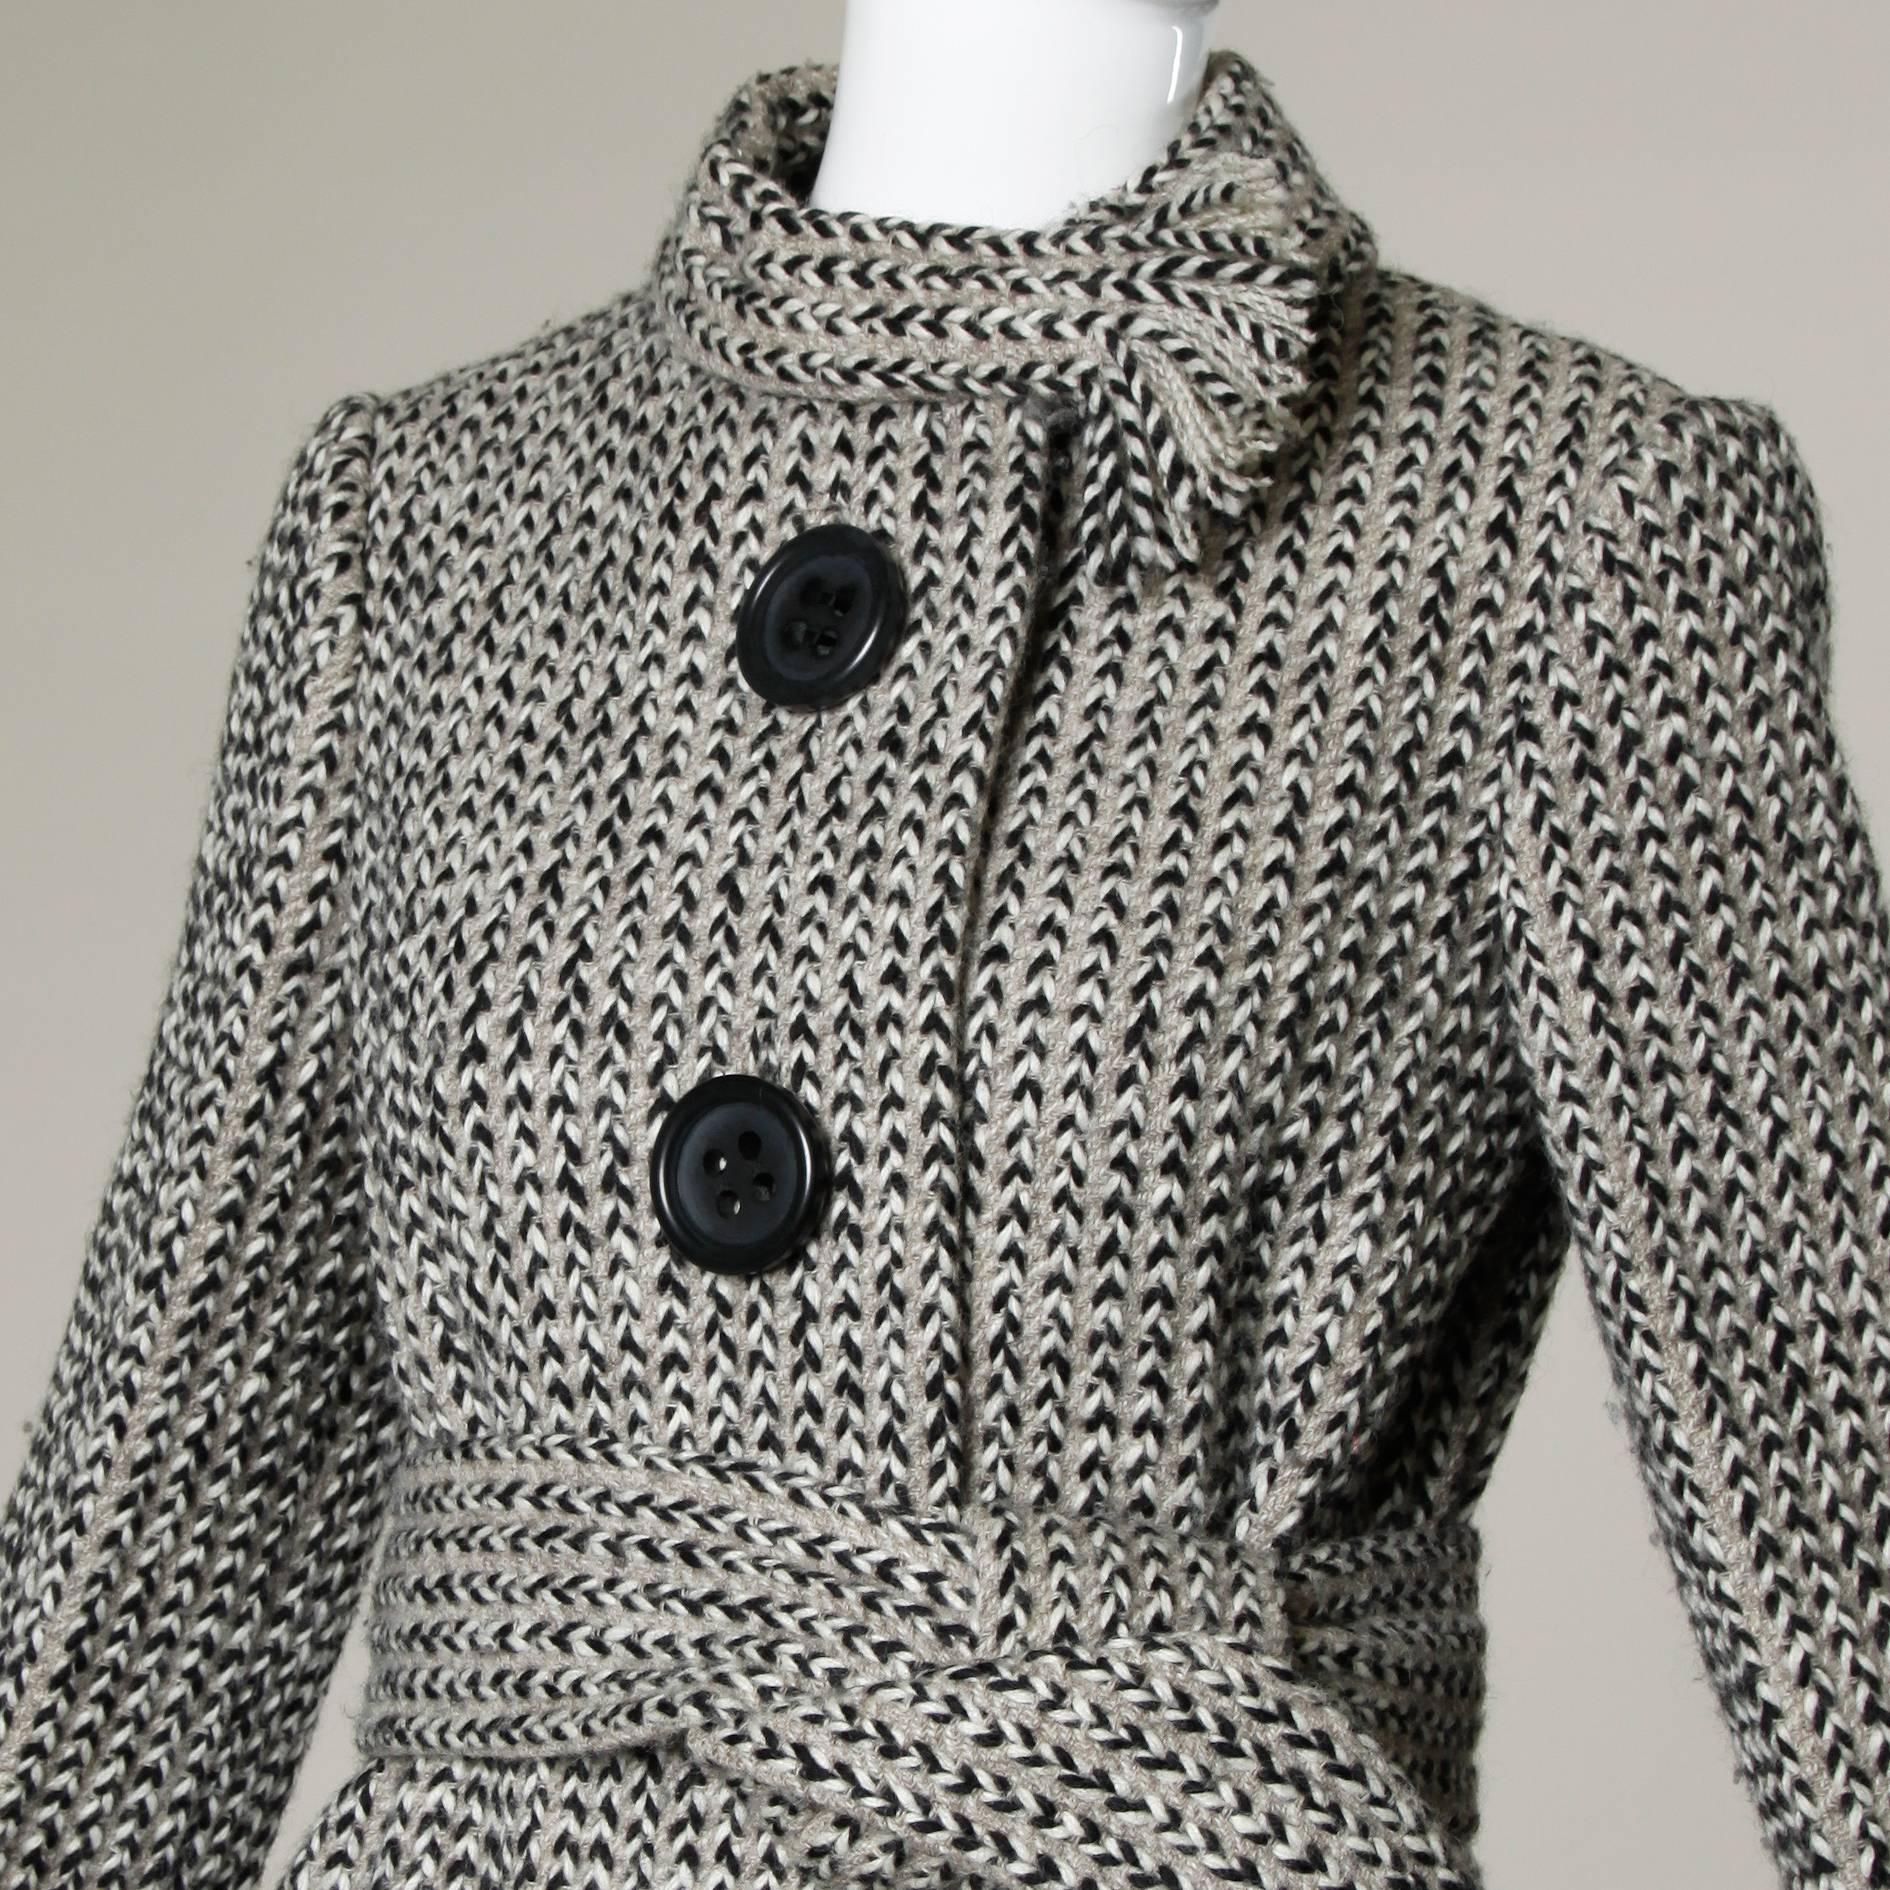 Stunning vintage wool coat by Pauline Trigere with an attached ascot scarf collar and waist tie. Beautiful couture construction with hand-stitched detailing throughout the piece. 

Details:

Fully Lined
Matching Belt 
Front Pockets
Front Button